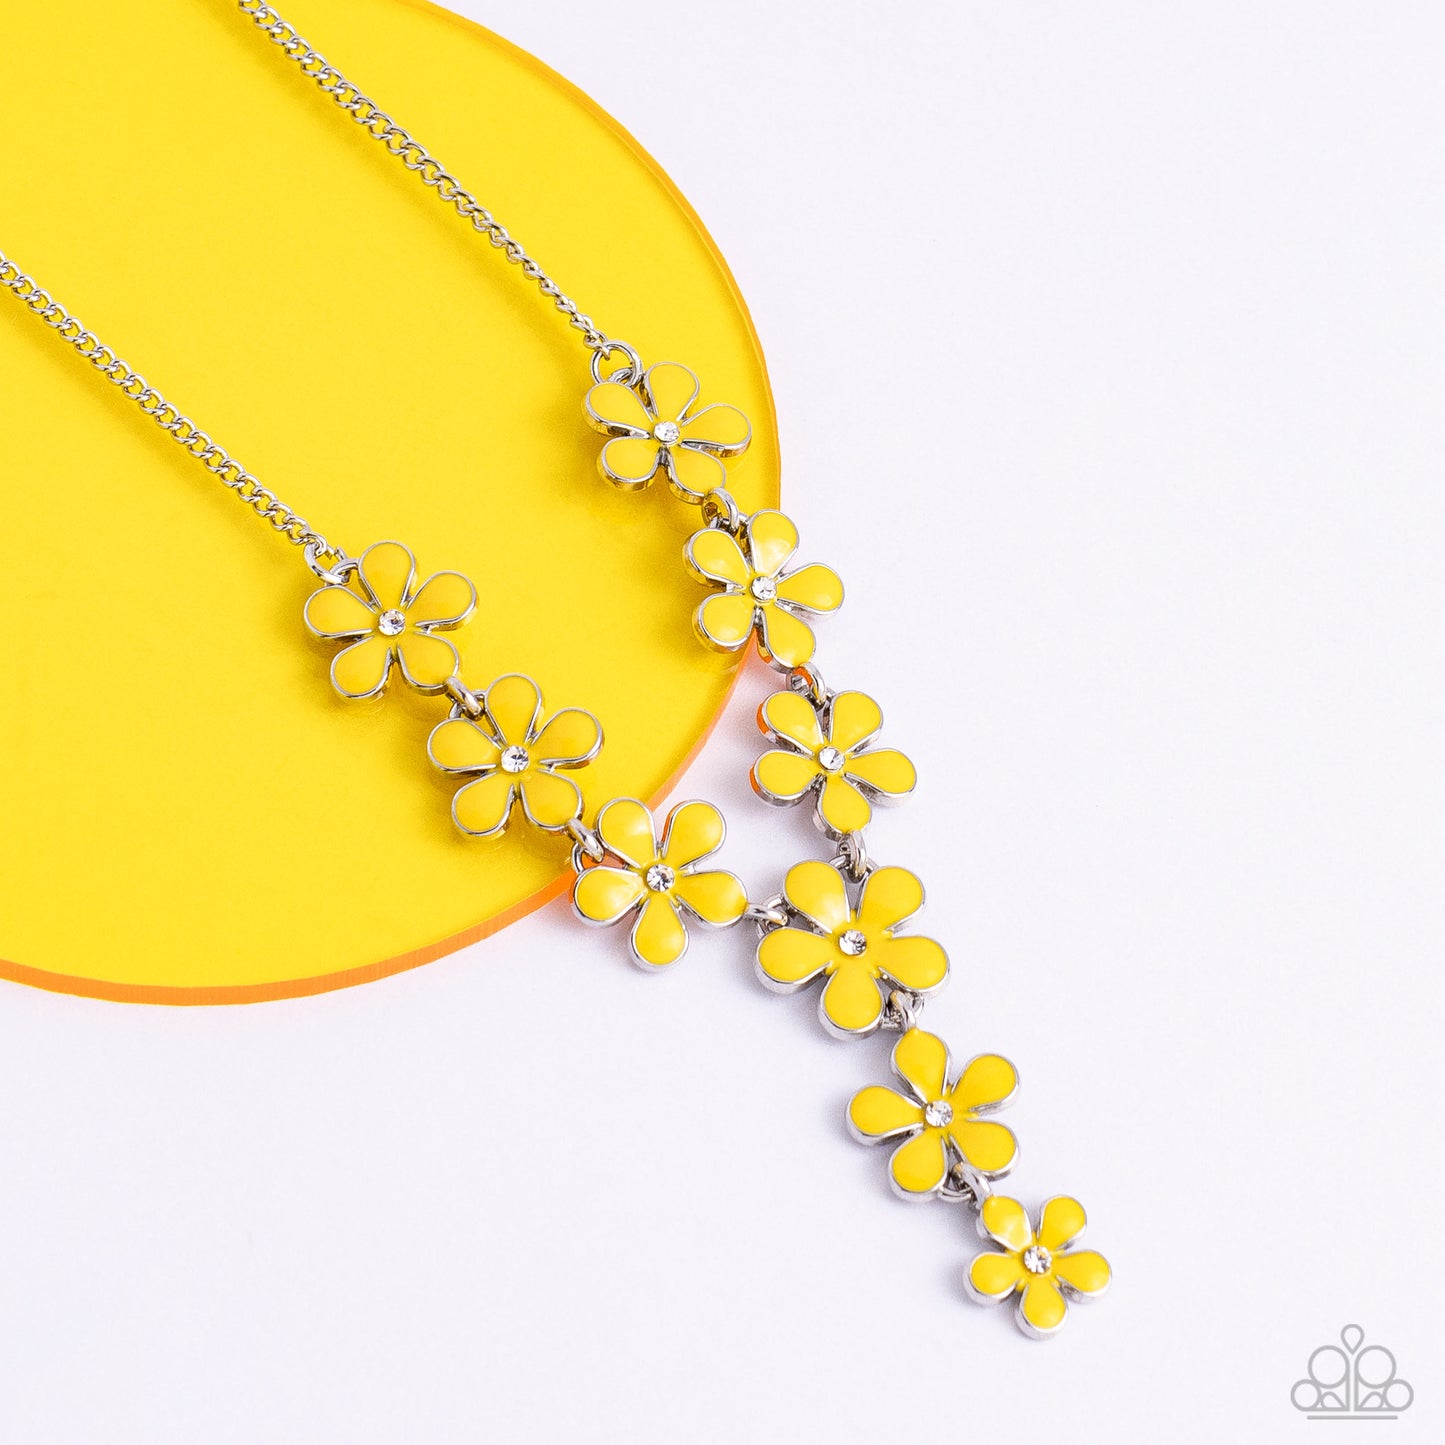 Flowering Feature Yellow Necklace - Paparazzi Accessories  Dotted with white rhinestone centers, whimsical Primrose paint flowers delicately link into an extended pendant below the collar for an ethereal fashion. Features an adjustable clasp closure.  Sold as one individual necklace. Includes one pair of matching earrings.  P2WH-YWXX-298XX